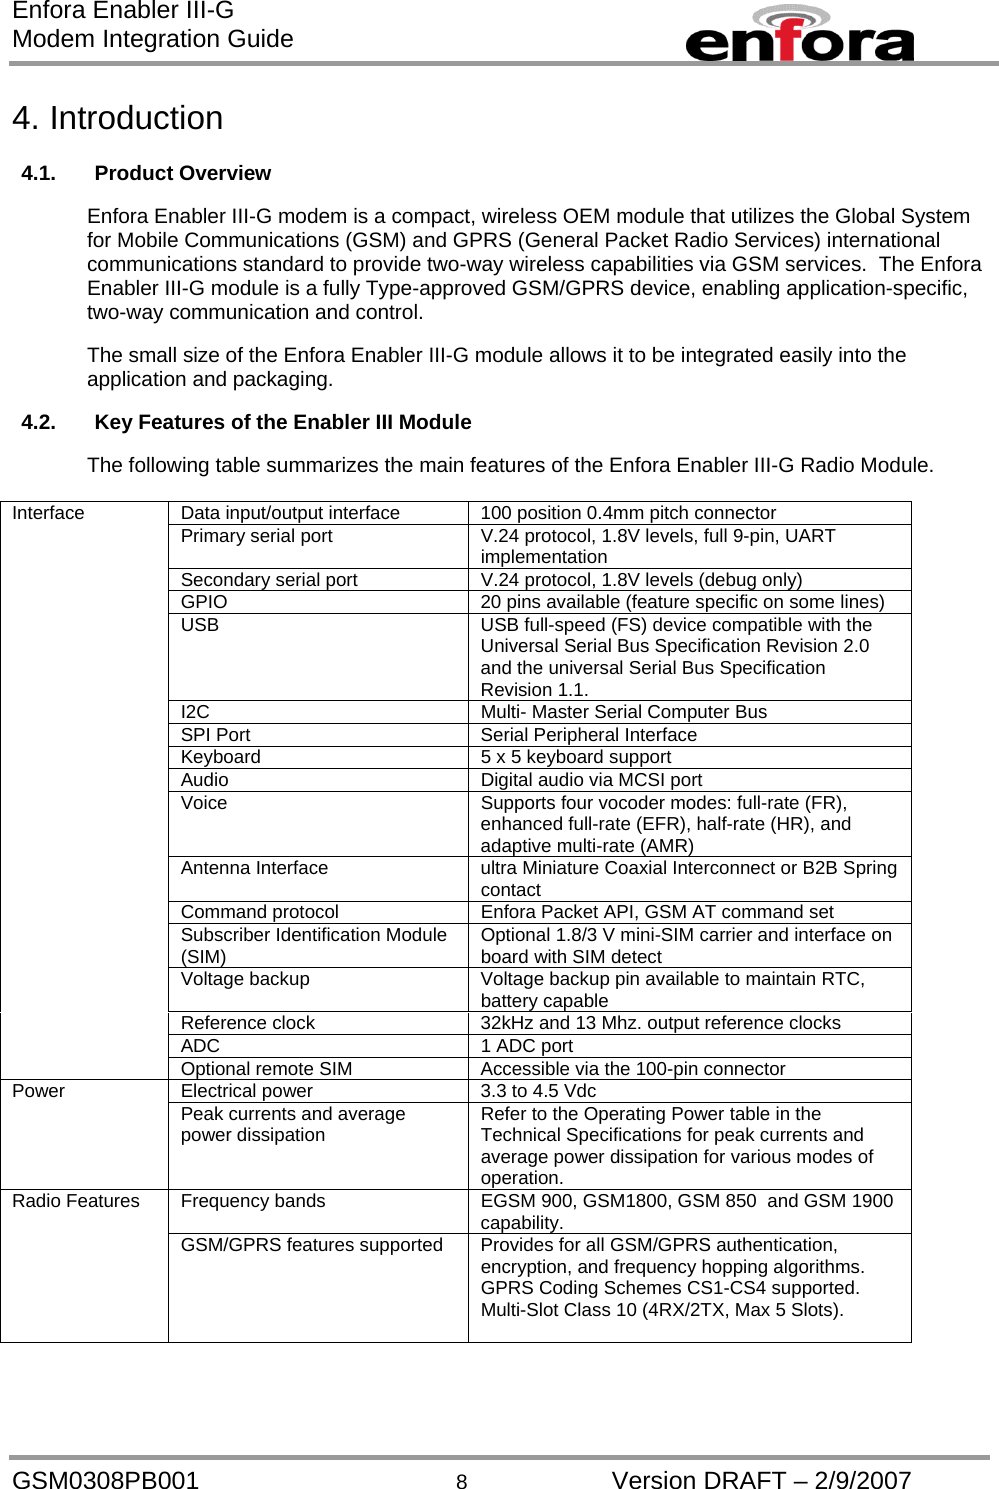 Enfora Enabler III-G Modem Integration Guide  4. Introduction  4.1. Product Overview  Enfora Enabler III-G modem is a compact, wireless OEM module that utilizes the Global System for Mobile Communications (GSM) and GPRS (General Packet Radio Services) international communications standard to provide two-way wireless capabilities via GSM services.  The Enfora Enabler III-G module is a fully Type-approved GSM/GPRS device, enabling application-specific, two-way communication and control.    The small size of the Enfora Enabler III-G module allows it to be integrated easily into the application and packaging.  4.2.  Key Features of the Enabler III Module  The following table summarizes the main features of the Enfora Enabler III-G Radio Module.  Data input/output interface  100 position 0.4mm pitch connector Primary serial port  V.24 protocol, 1.8V levels, full 9-pin, UART implementation Secondary serial port  V.24 protocol, 1.8V levels (debug only)  GPIO  20 pins available (feature specific on some lines) USB  USB full-speed (FS) device compatible with the Universal Serial Bus Specification Revision 2.0 and the universal Serial Bus Specification Revision 1.1. I2C  Multi- Master Serial Computer Bus SPI Port  Serial Peripheral Interface Keyboard  5 x 5 keyboard support Audio  Digital audio via MCSI port Voice  Supports four vocoder modes: full-rate (FR), enhanced full-rate (EFR), half-rate (HR), and adaptive multi-rate (AMR) Antenna Interface  ultra Miniature Coaxial Interconnect or B2B Spring contact Command protocol  Enfora Packet API, GSM AT command set Subscriber Identification Module (SIM)  Optional 1.8/3 V mini-SIM carrier and interface on board with SIM detect Voltage backup  Voltage backup pin available to maintain RTC, battery capable Reference clock  32kHz and 13 Mhz. output reference clocks ADC  1 ADC port Interface Optional remote SIM  Accessible via the 100-pin connector Electrical power  3.3 to 4.5 Vdc Power    Peak currents and average power dissipation  Refer to the Operating Power table in the Technical Specifications for peak currents and average power dissipation for various modes of operation. Frequency bands  EGSM 900, GSM1800, GSM 850  and GSM 1900 capability. Radio Features GSM/GPRS features supported  Provides for all GSM/GPRS authentication, encryption, and frequency hopping algorithms.  GPRS Coding Schemes CS1-CS4 supported.  Multi-Slot Class 10 (4RX/2TX, Max 5 Slots).  GSM0308PB001  8  Version DRAFT – 2/9/2007 